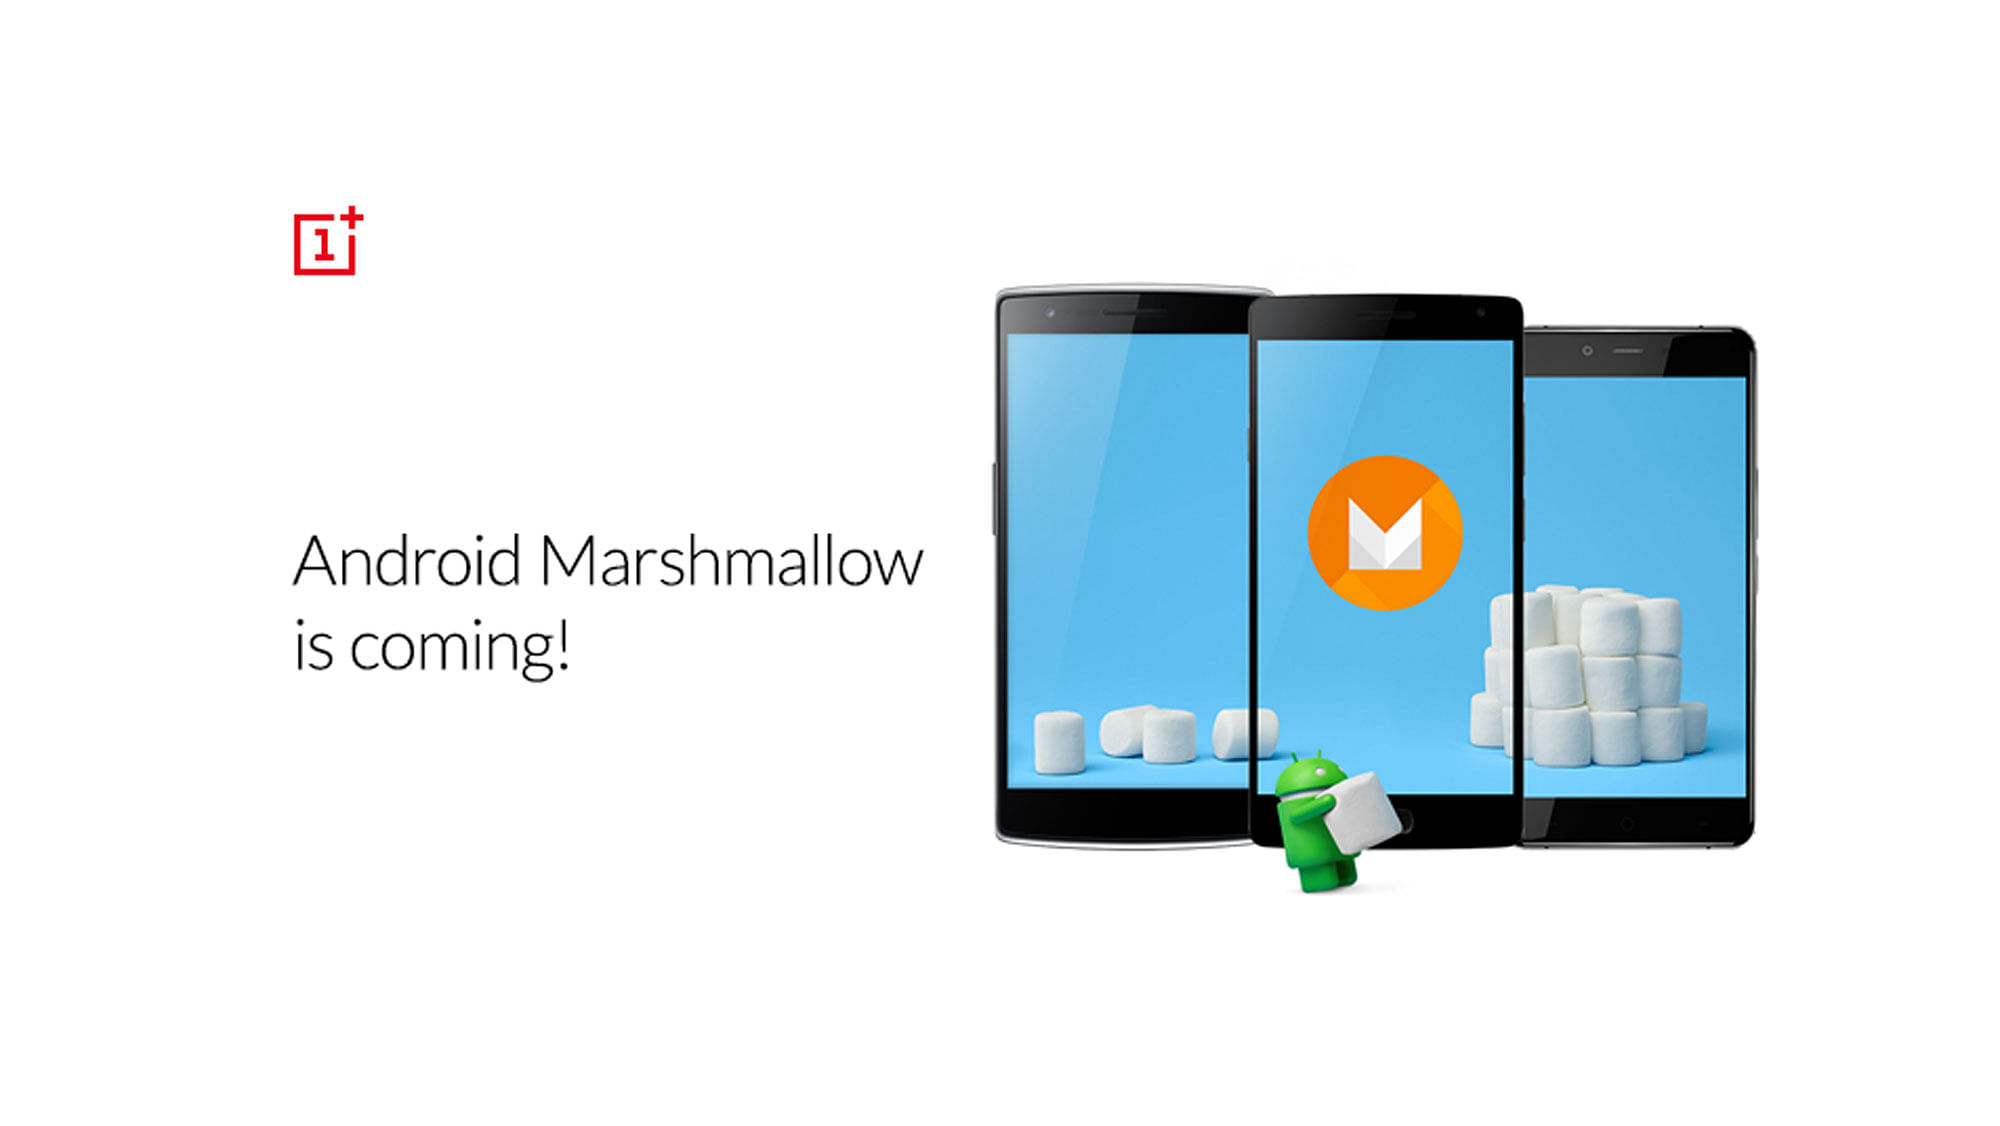 Android Marshmallow to roll out on OnePlus devices. (Photo Courtesy: <a href="https://forums.oneplus.net/threads/marshmallow-upgrade-schedule-for-oneplus-devices.406778/">OnePlus</a>)